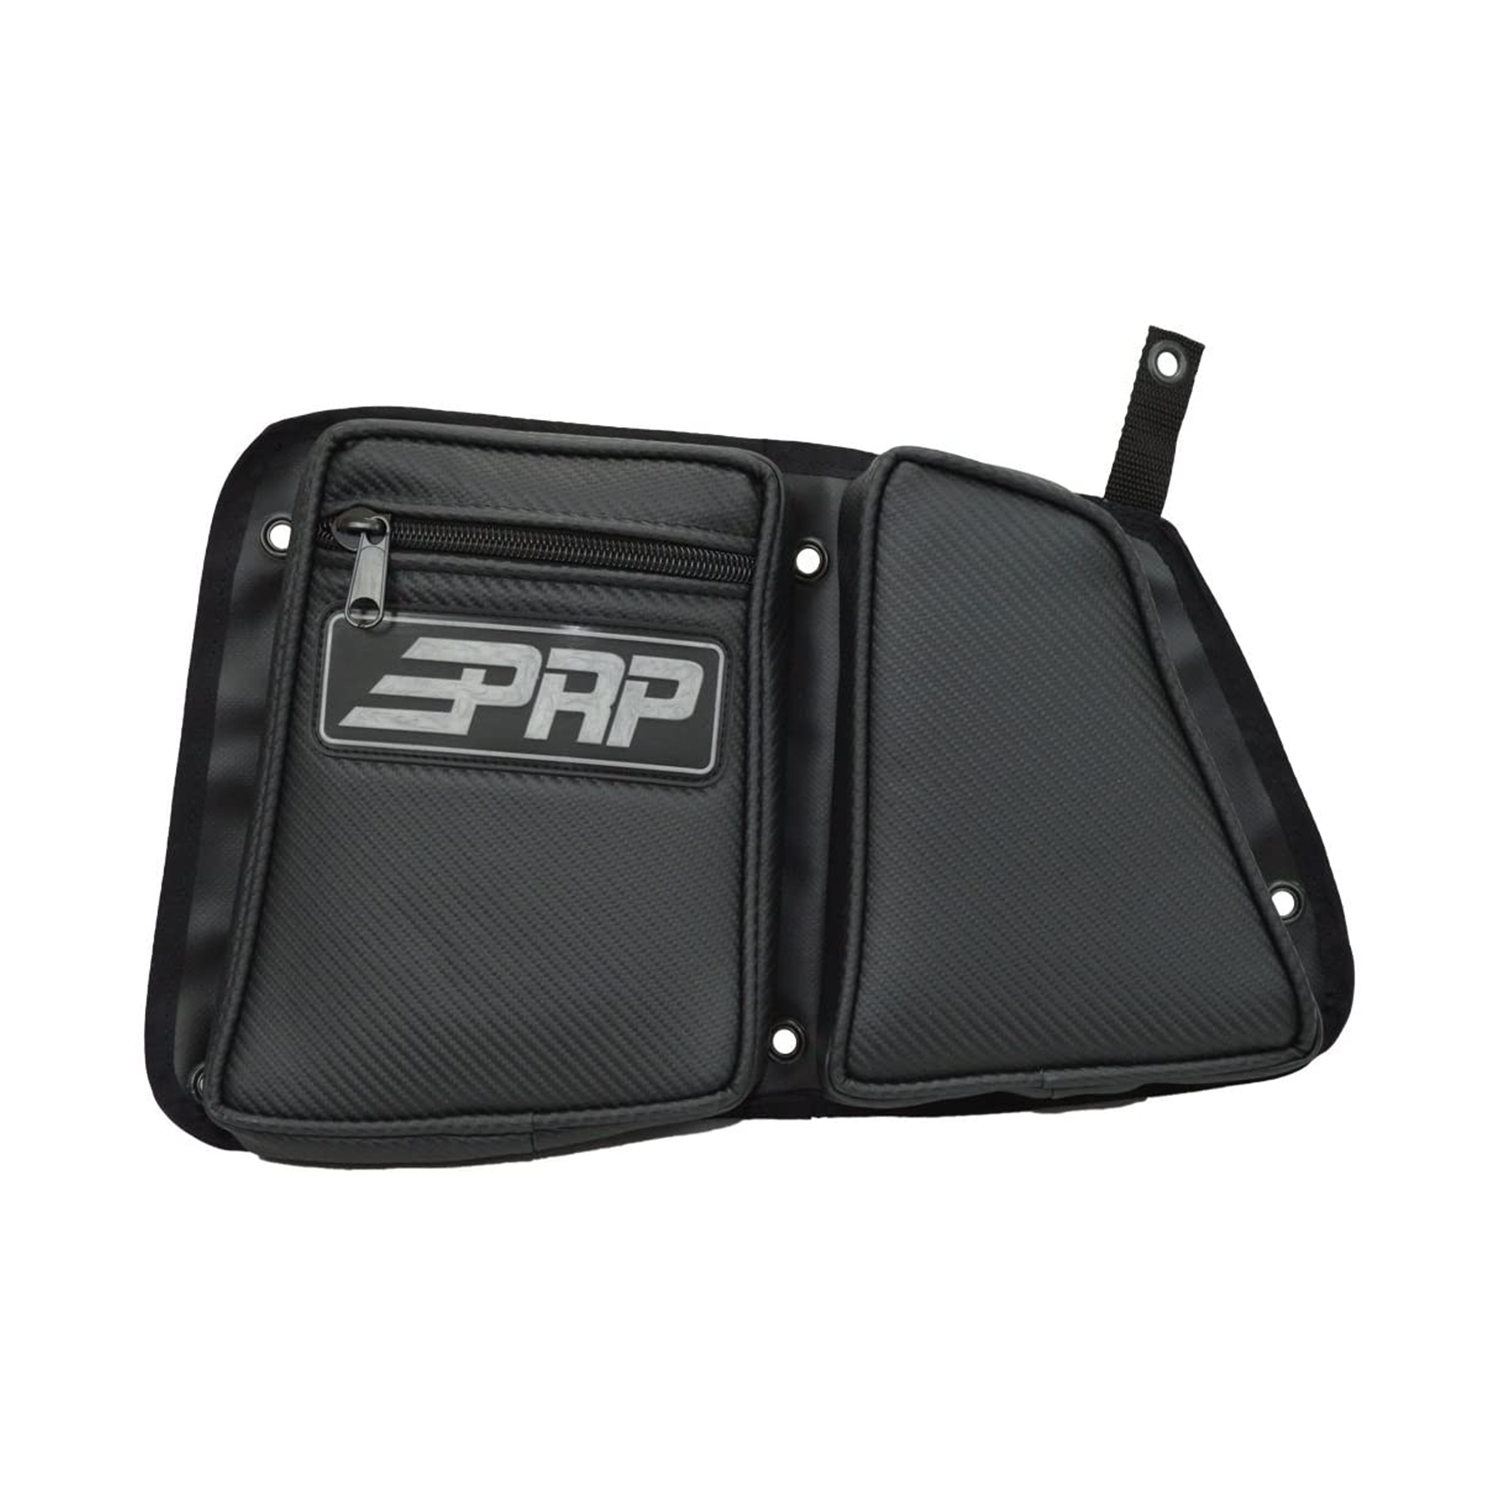 Door Bag With Knee Pad For Polaris Rzr, Rear Driver Side,